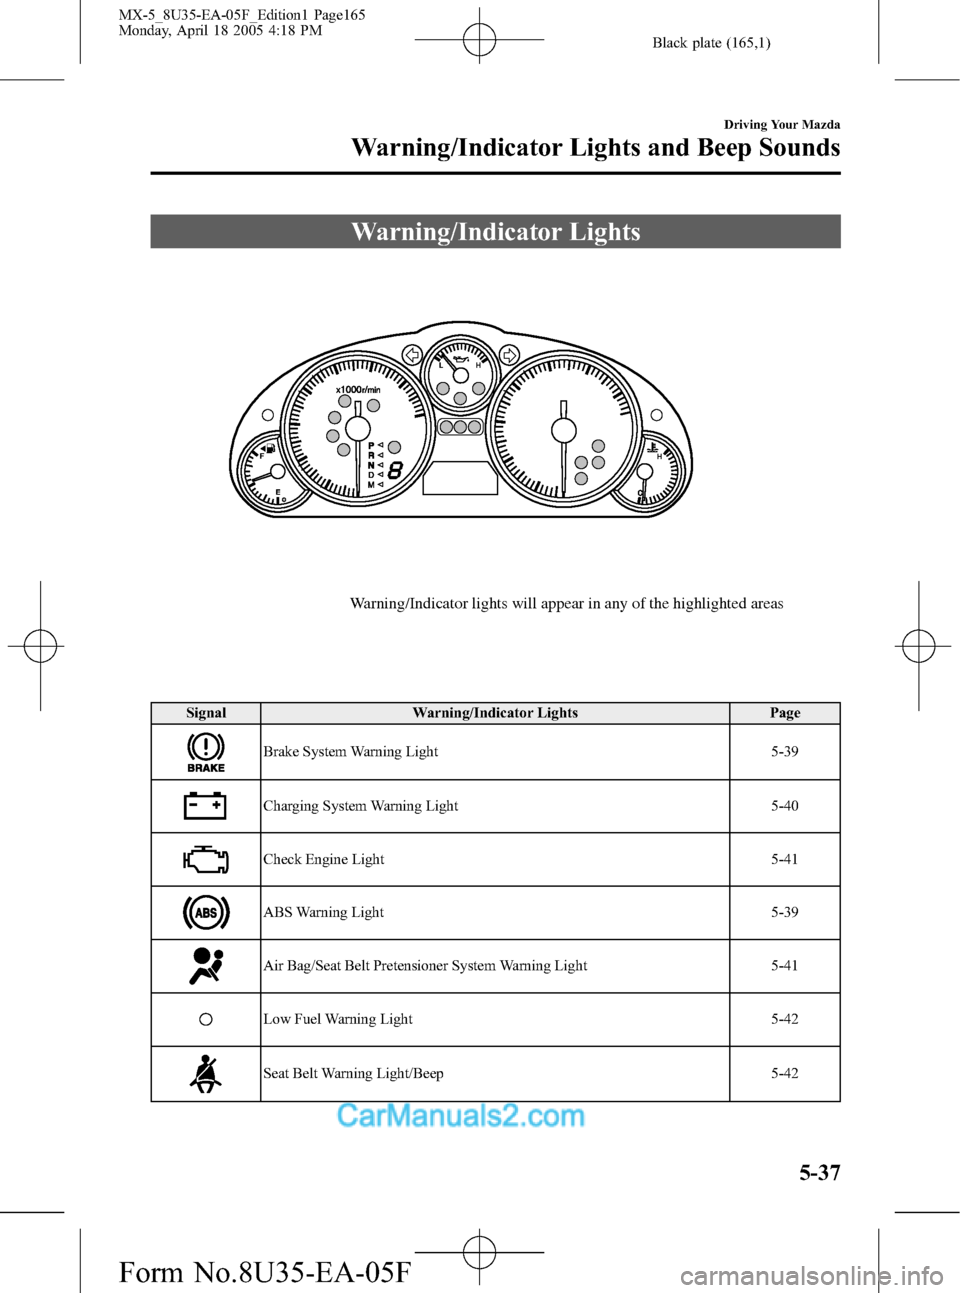 MAZDA MODEL MX-5 2006  Owners Manual (in English) Black plate (165,1)
Warning/Indicator Lights
Warning/Indicator lights will appear in any of the highlighted areas
Signal Warning/Indicator Lights Page
Brake System Warning Light 5-39
Charging System W